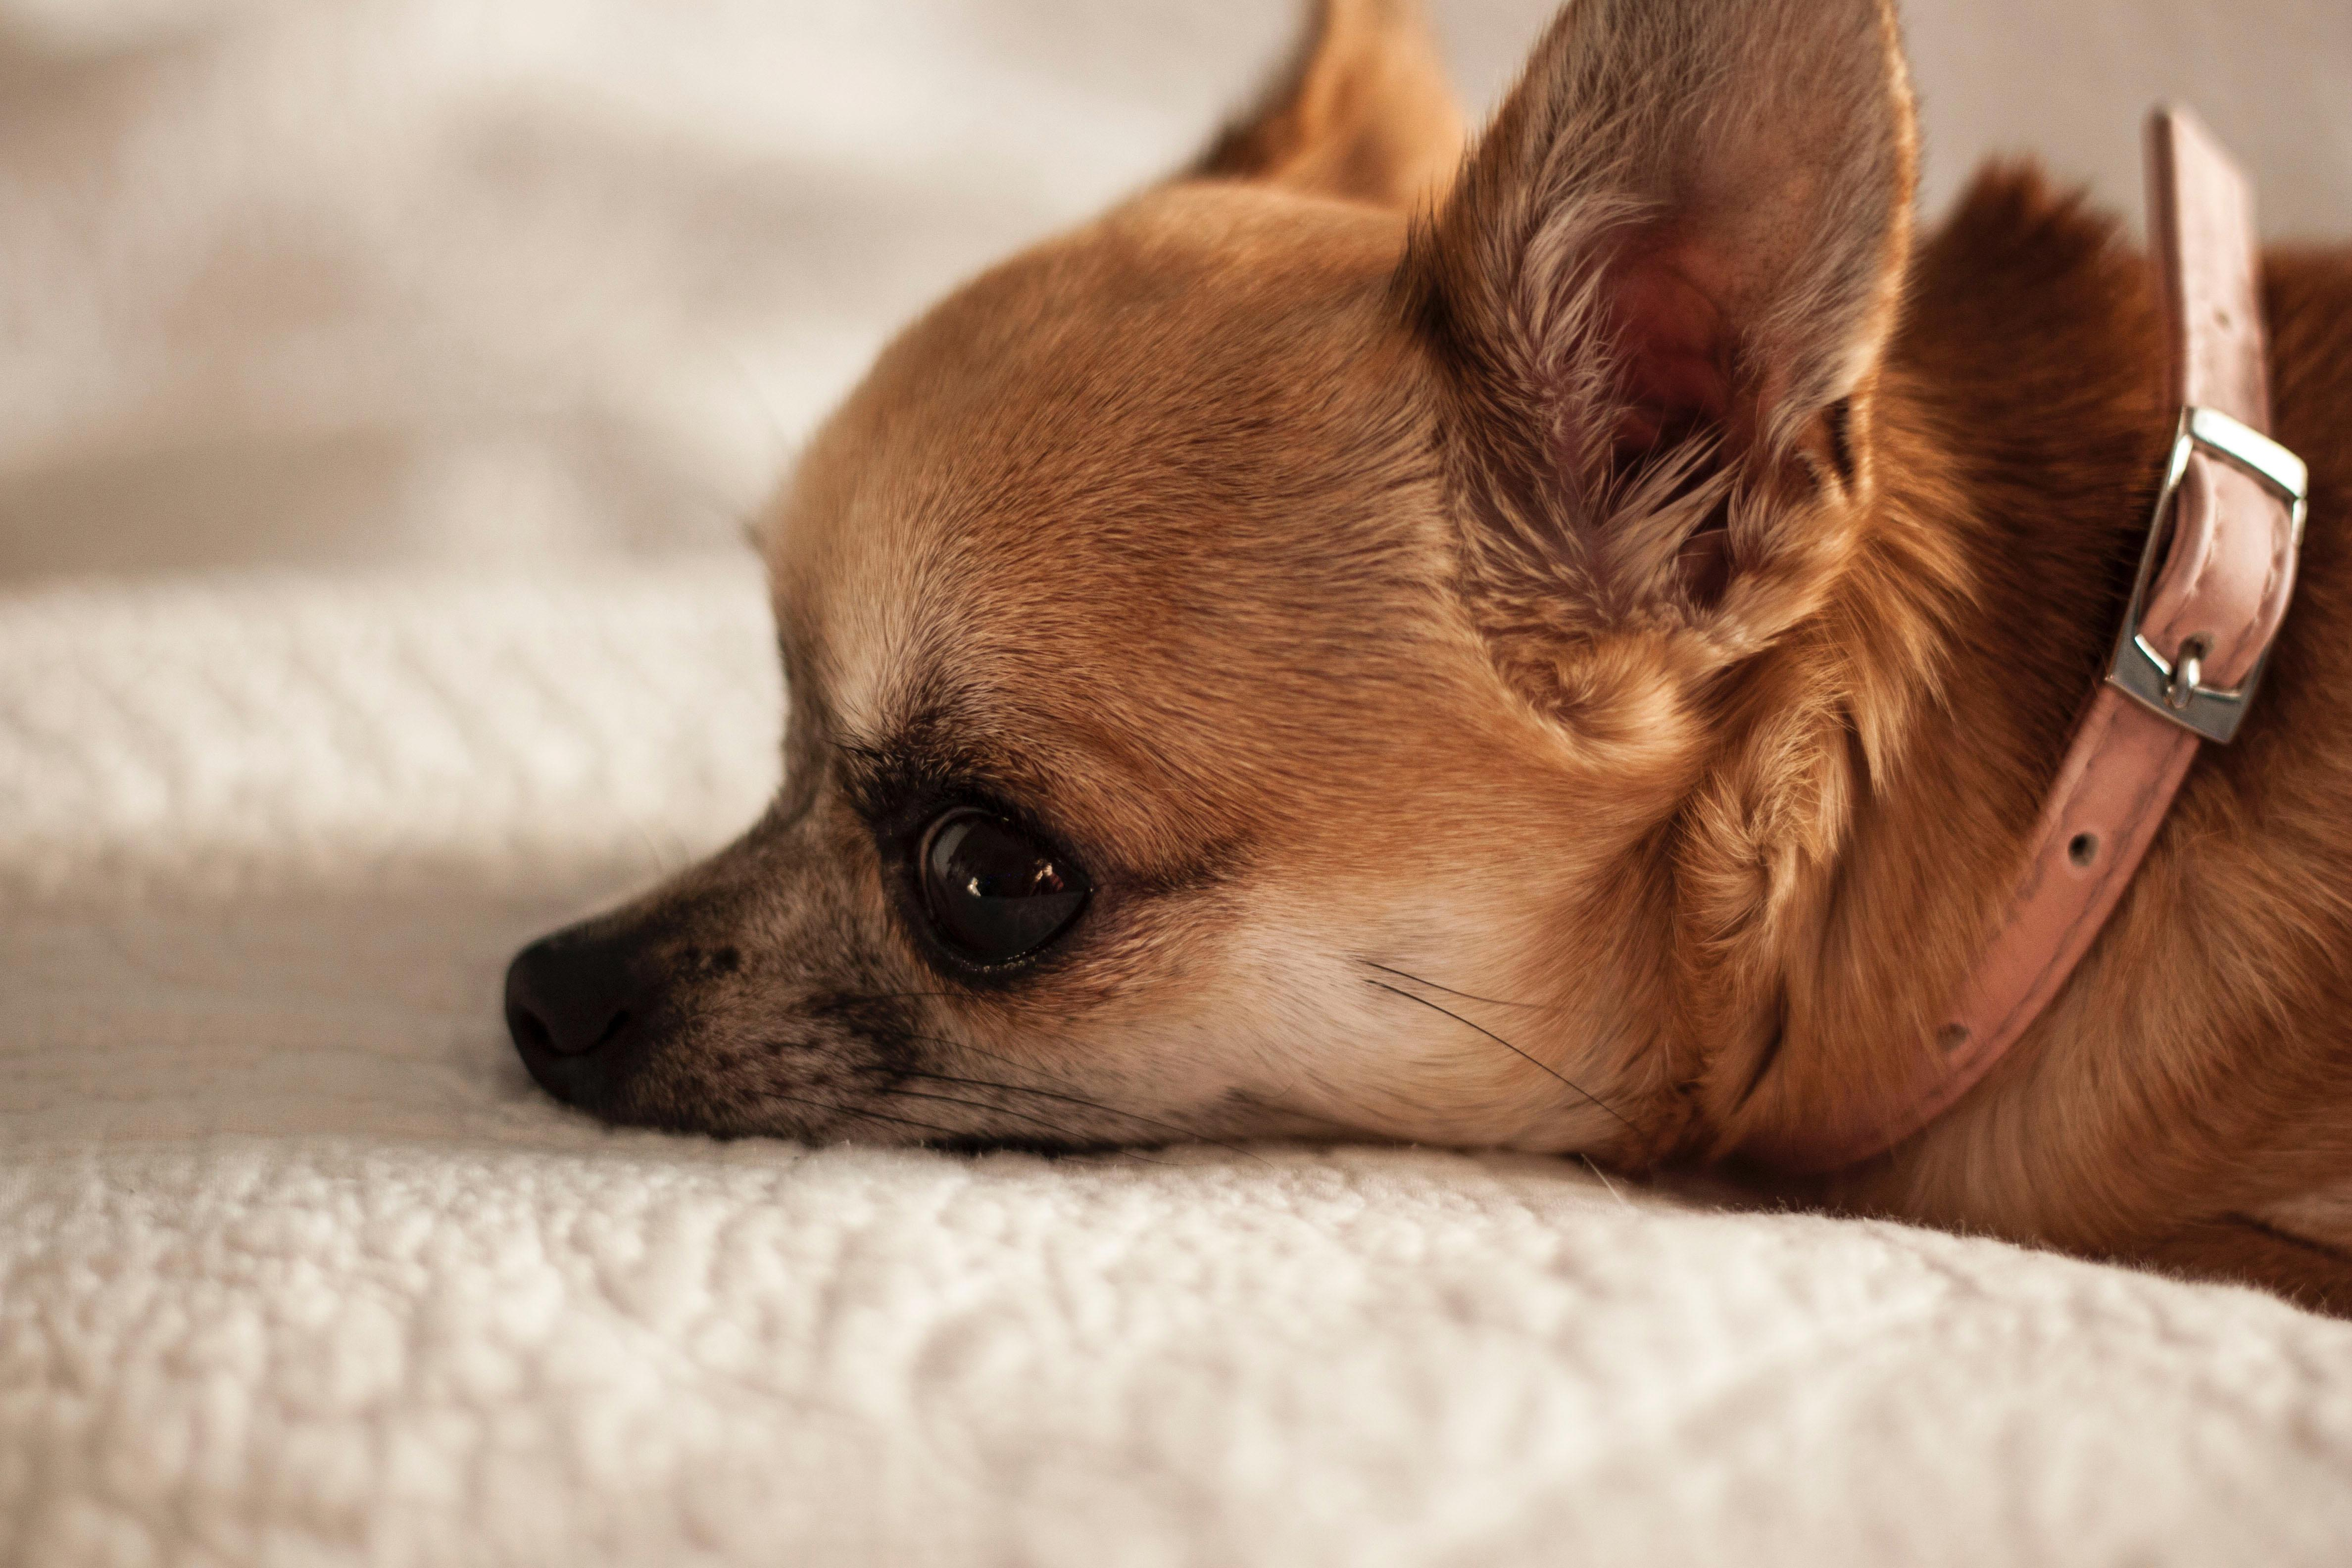 A Chilly Treat: Is Ice Cream Safe for Chihuahuas?